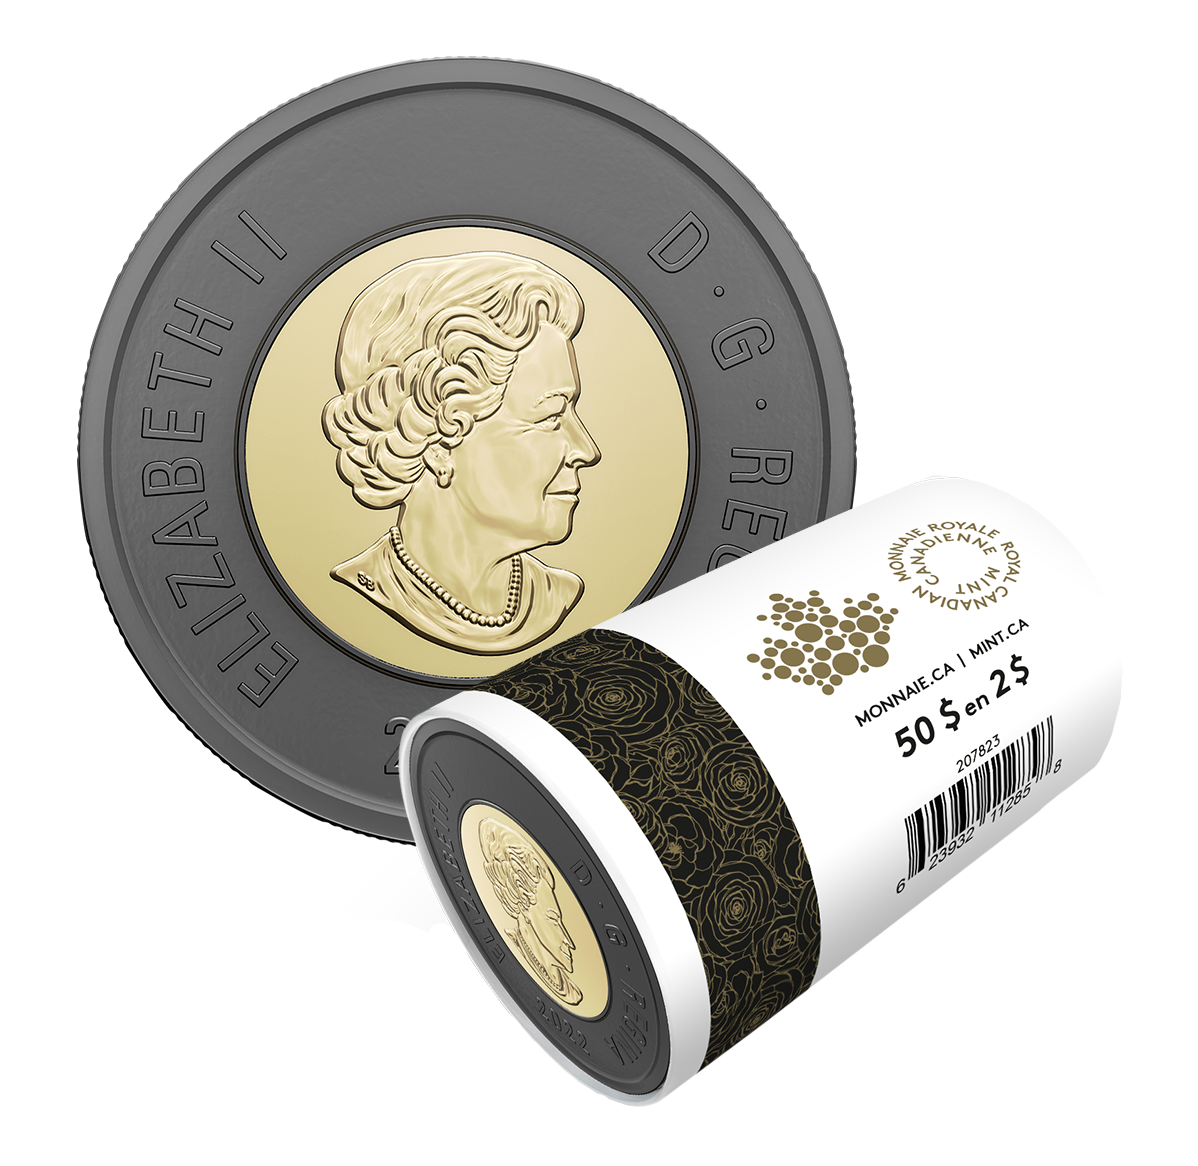 Special Wrap Roll – Honouring Queen ElizabethII | Royal Canadian Mint